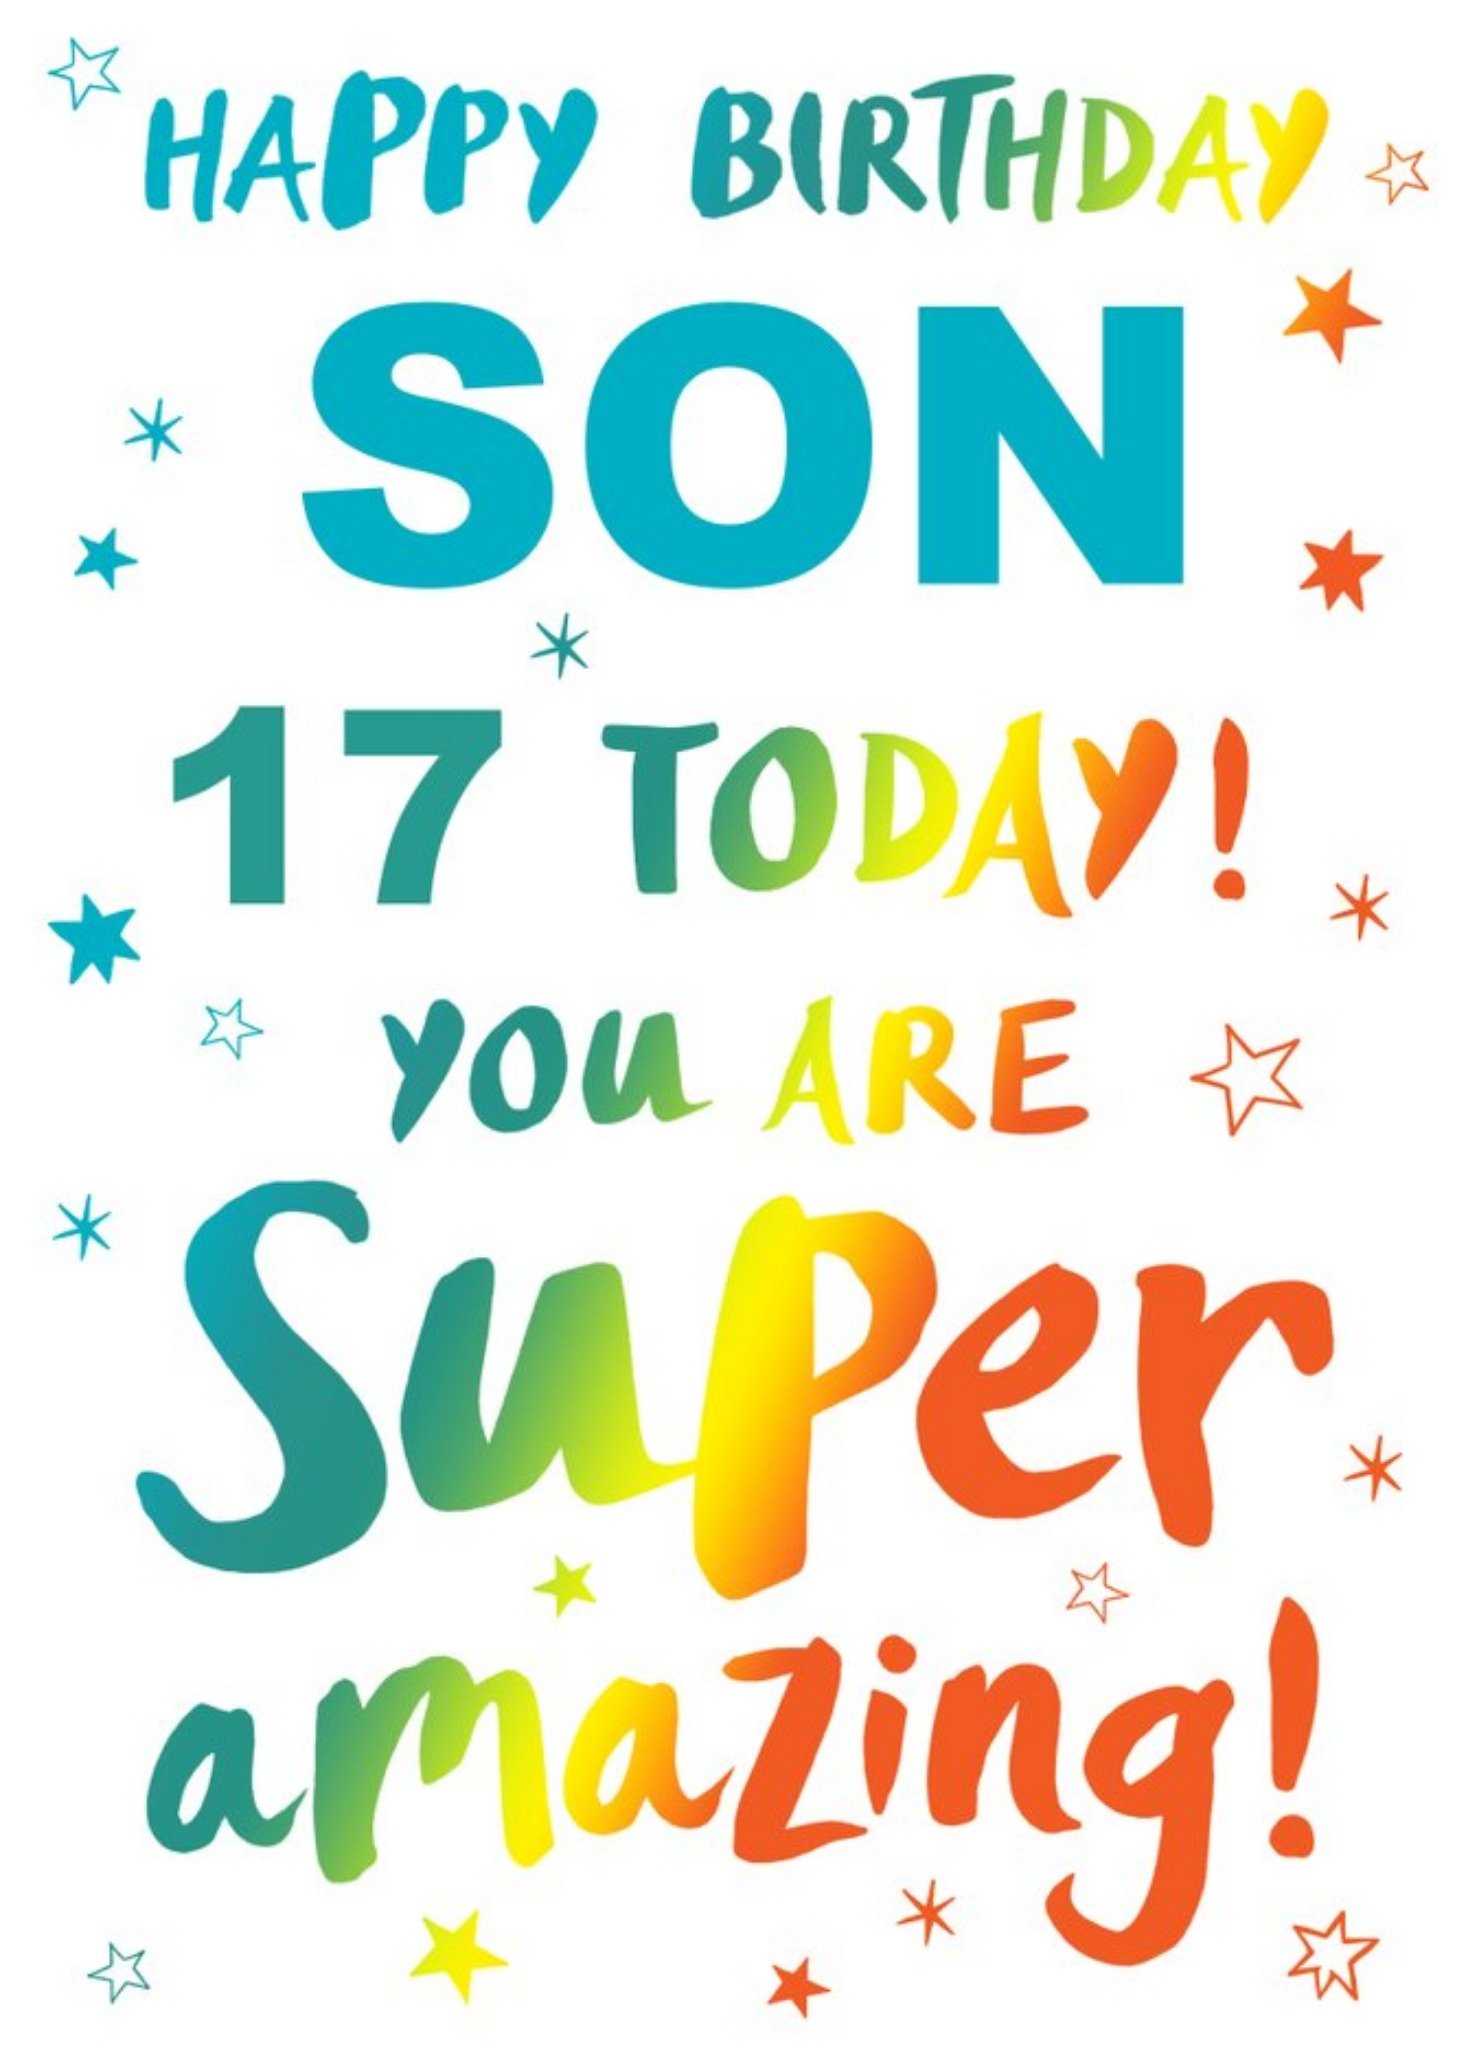 Moonpig Happy Birthday Son 17 Today You Are Super Amazing Card, Large